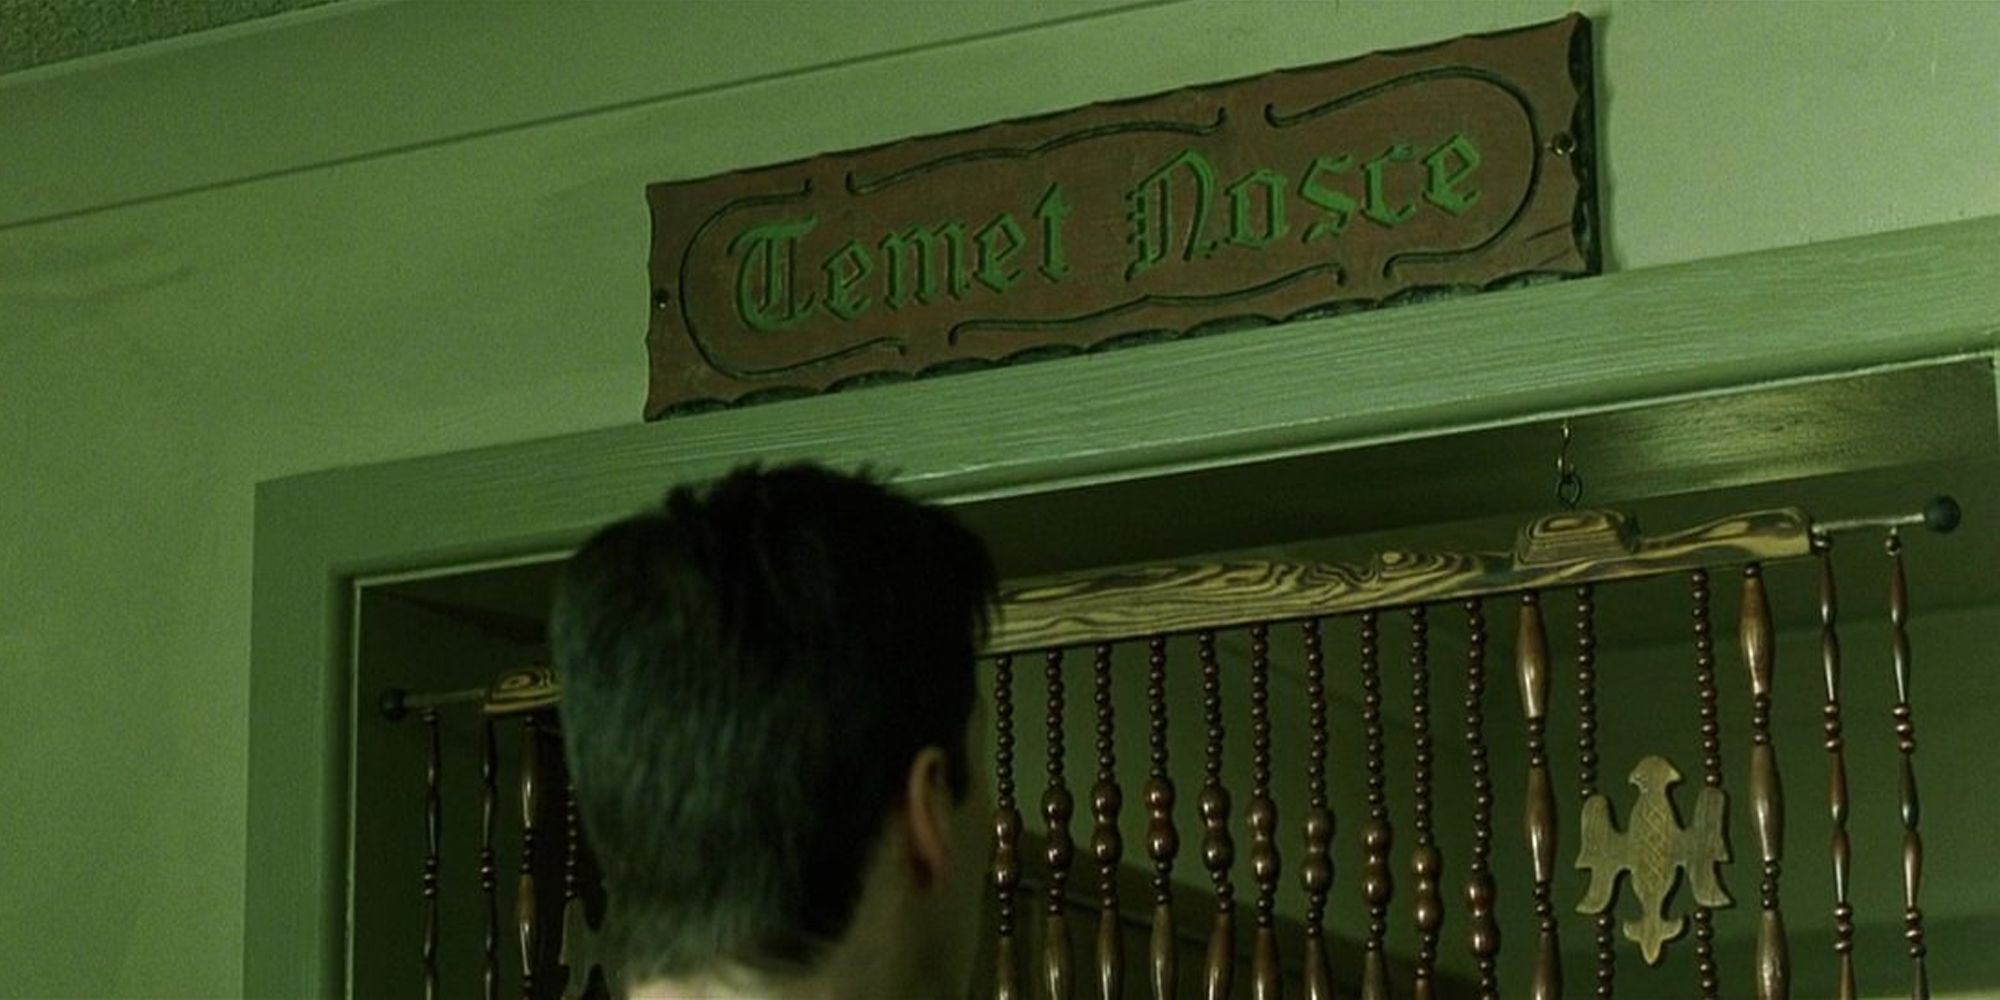 Neo looking at The Oracles temet nosce sign